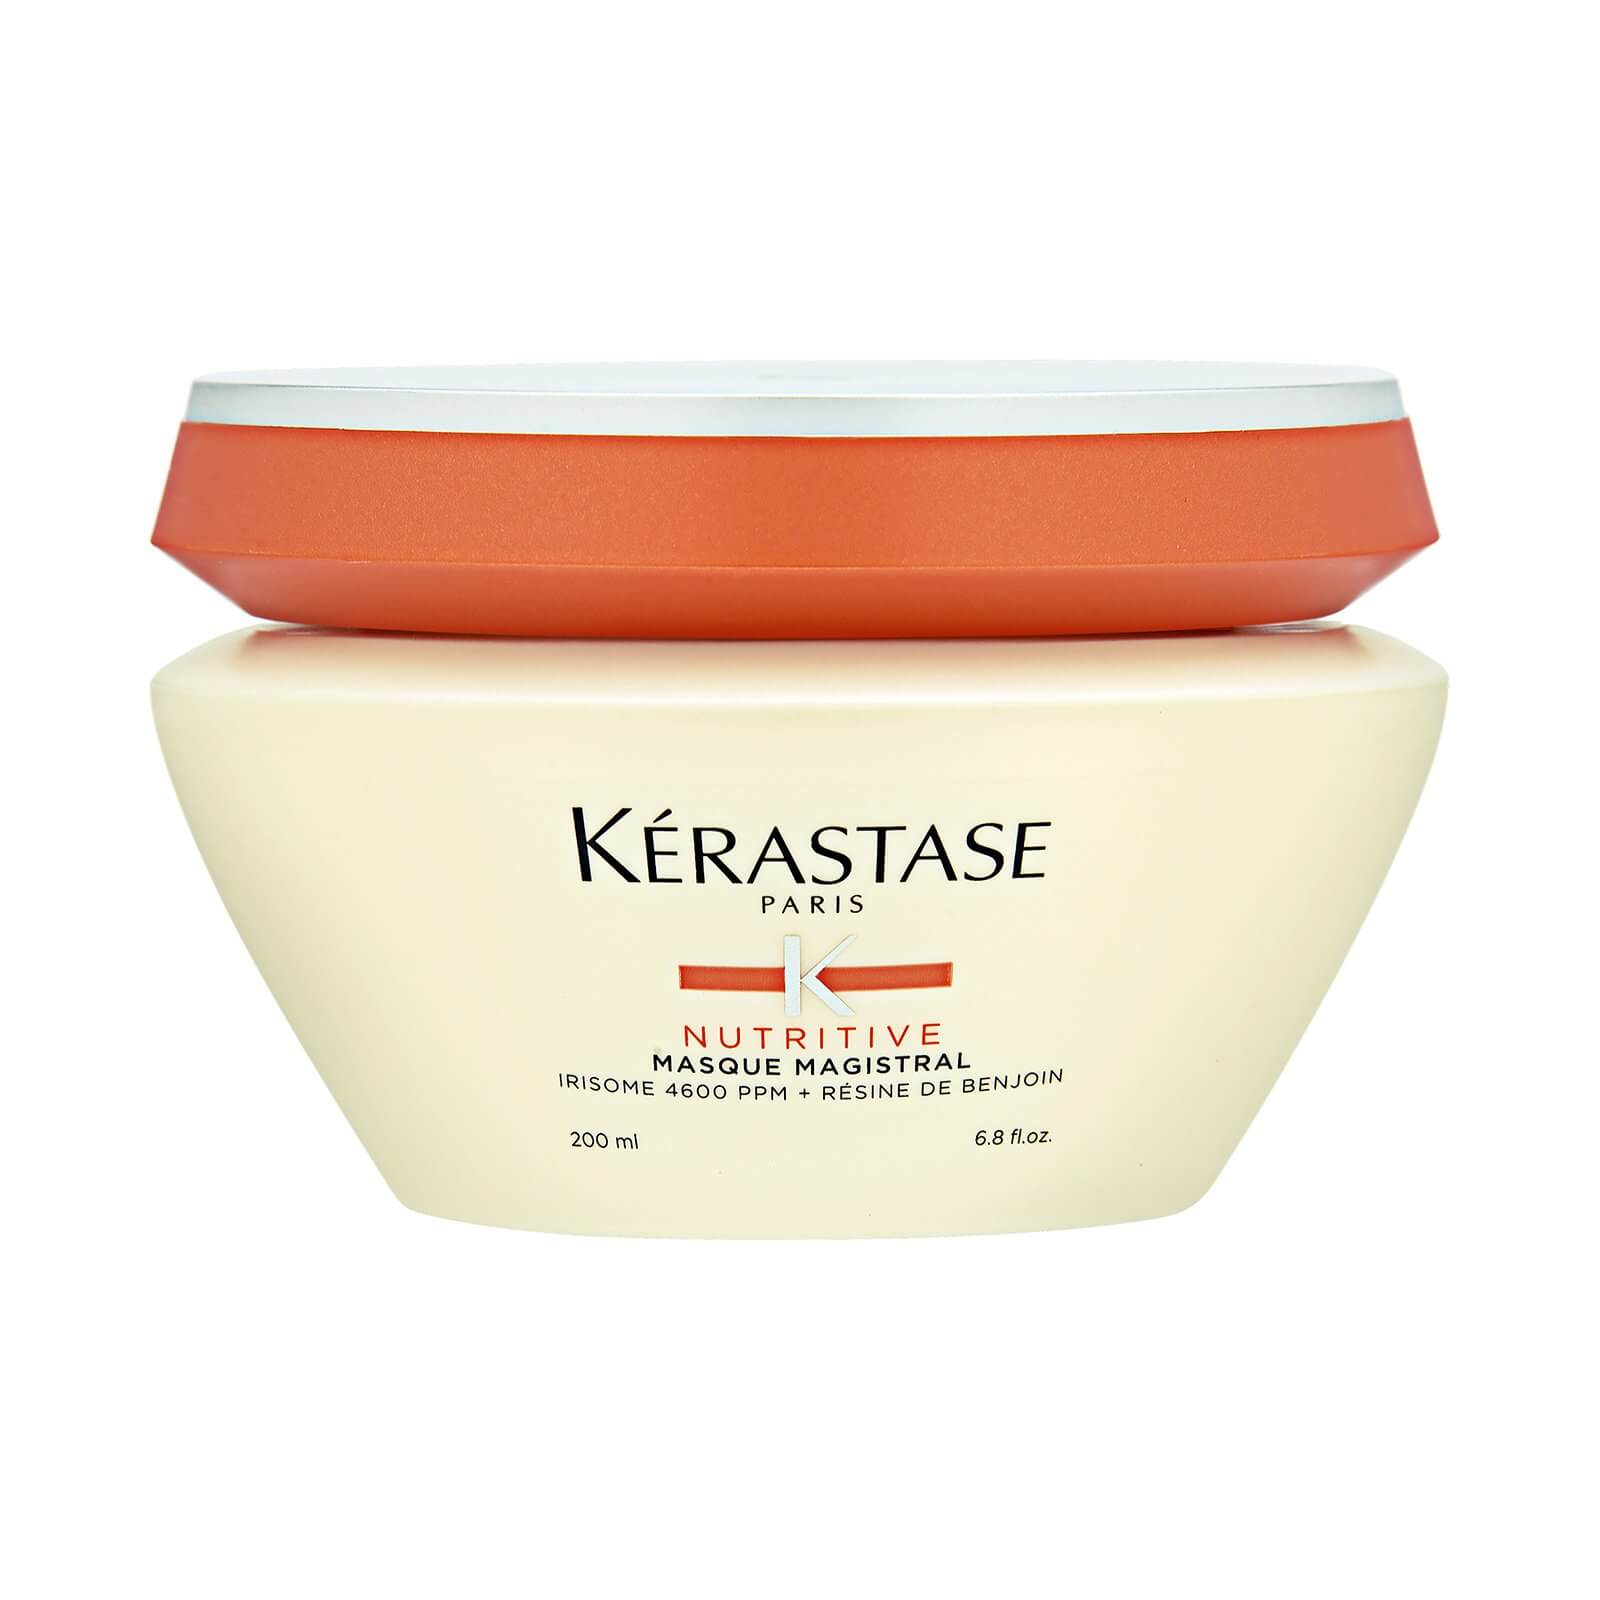 Nutritive Masque Magistral Fundamental Nutrition Masque (Severely Dired-Out Hair)